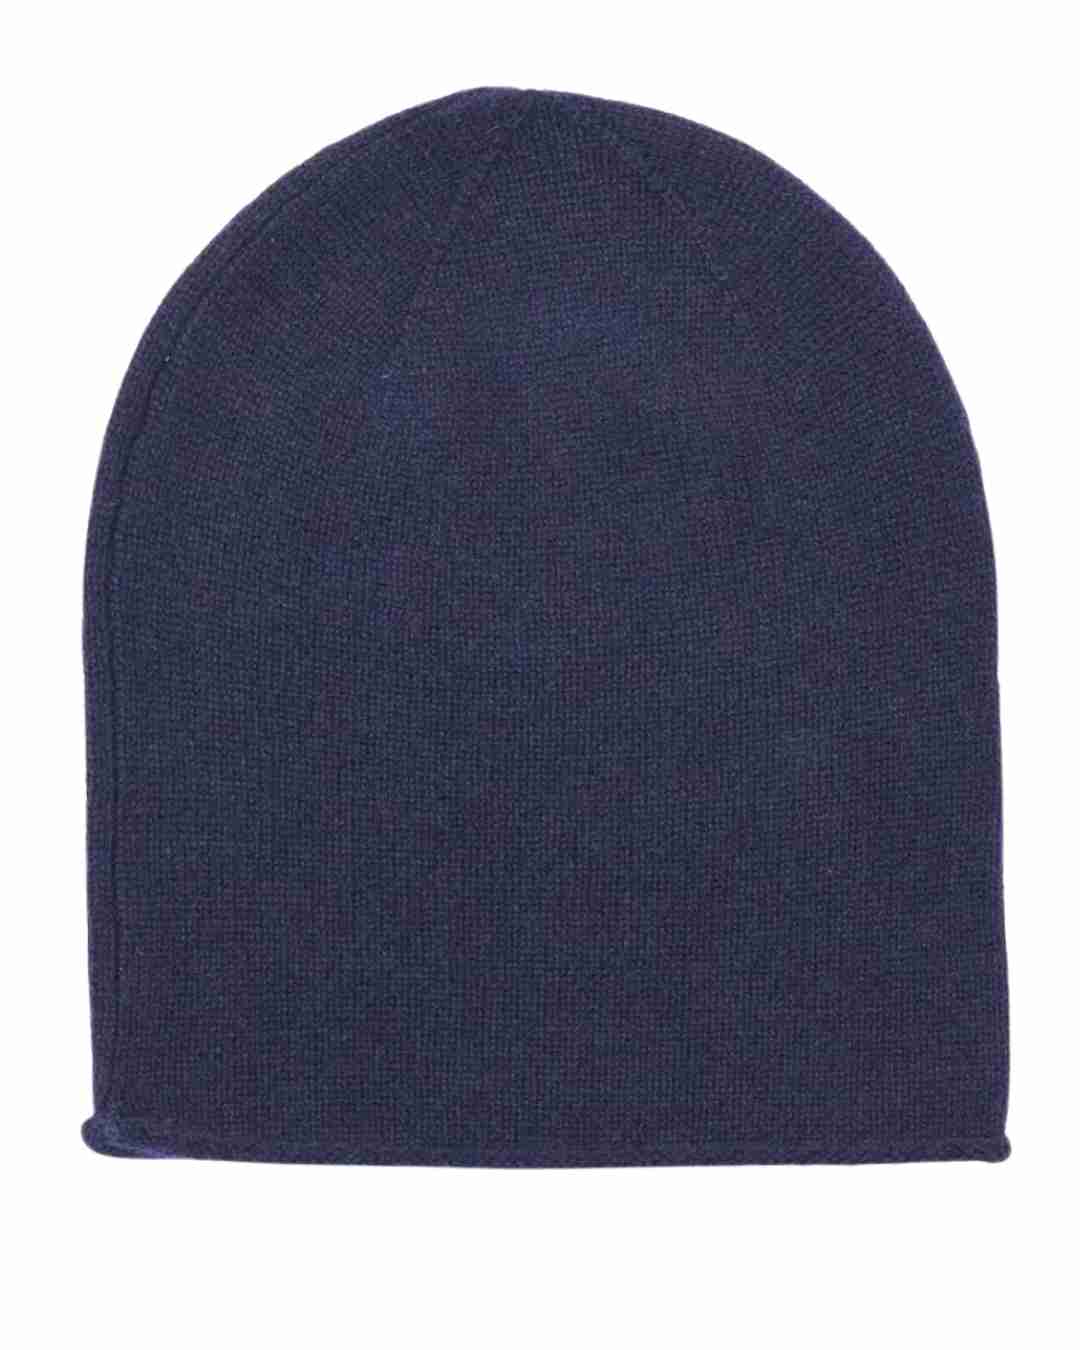 navy beanie and hat